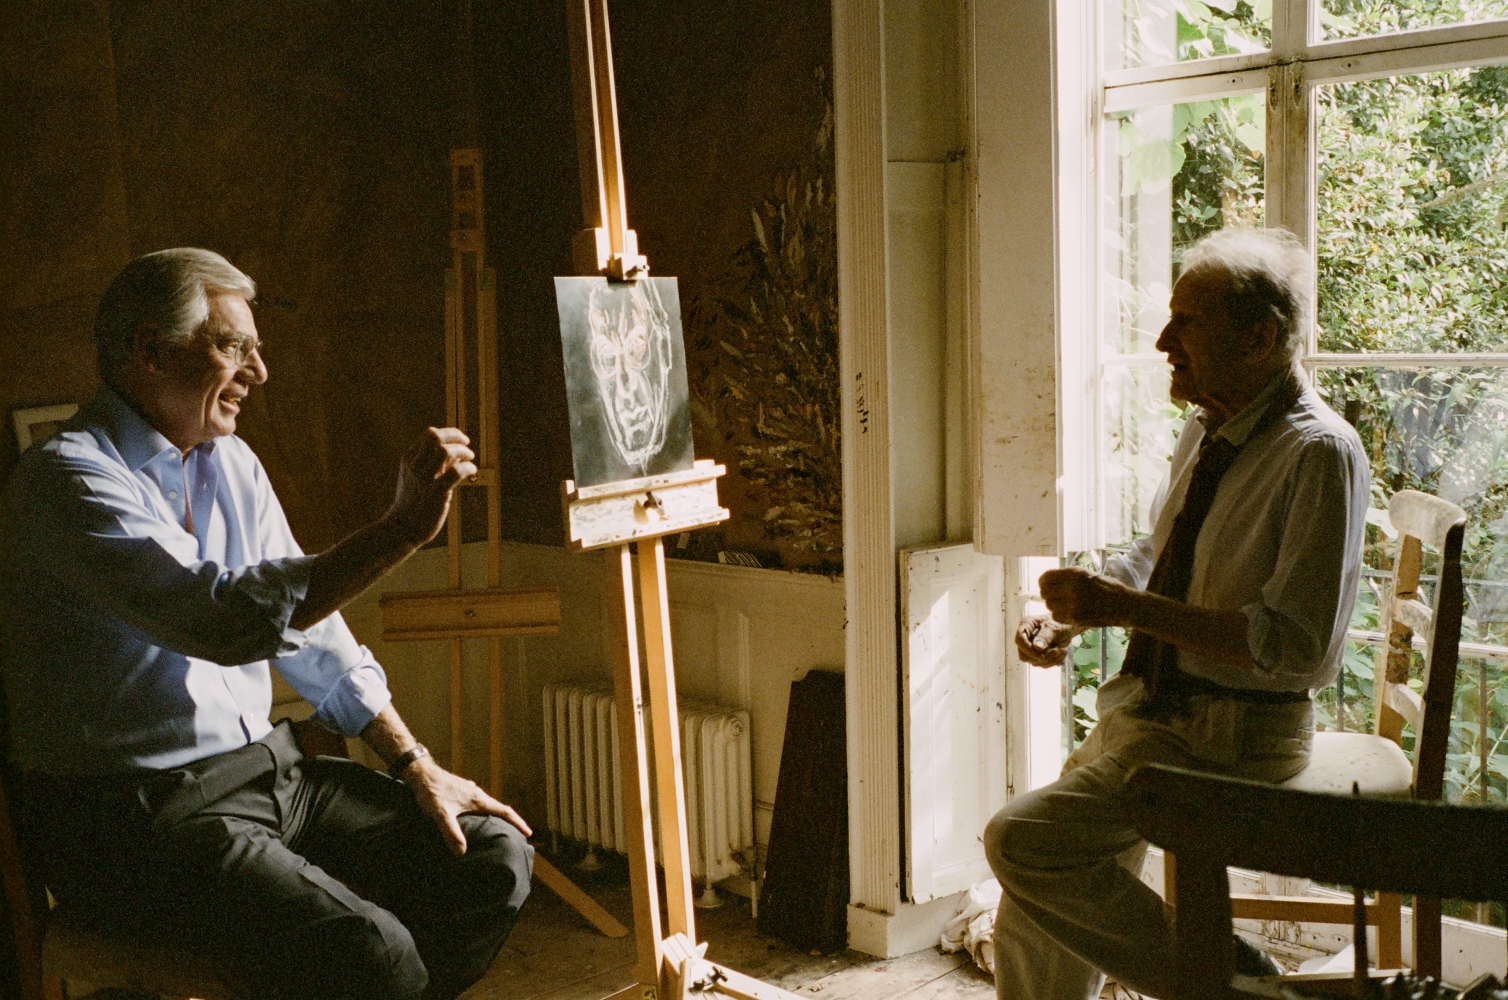 Lucian Freud and Bill Acquavella with the etching&nbsp;The New Yorker&nbsp;(2006), 2005, photographed by David Dawson., Art&nbsp;&copy; David Dawson / Bridgeman Images.